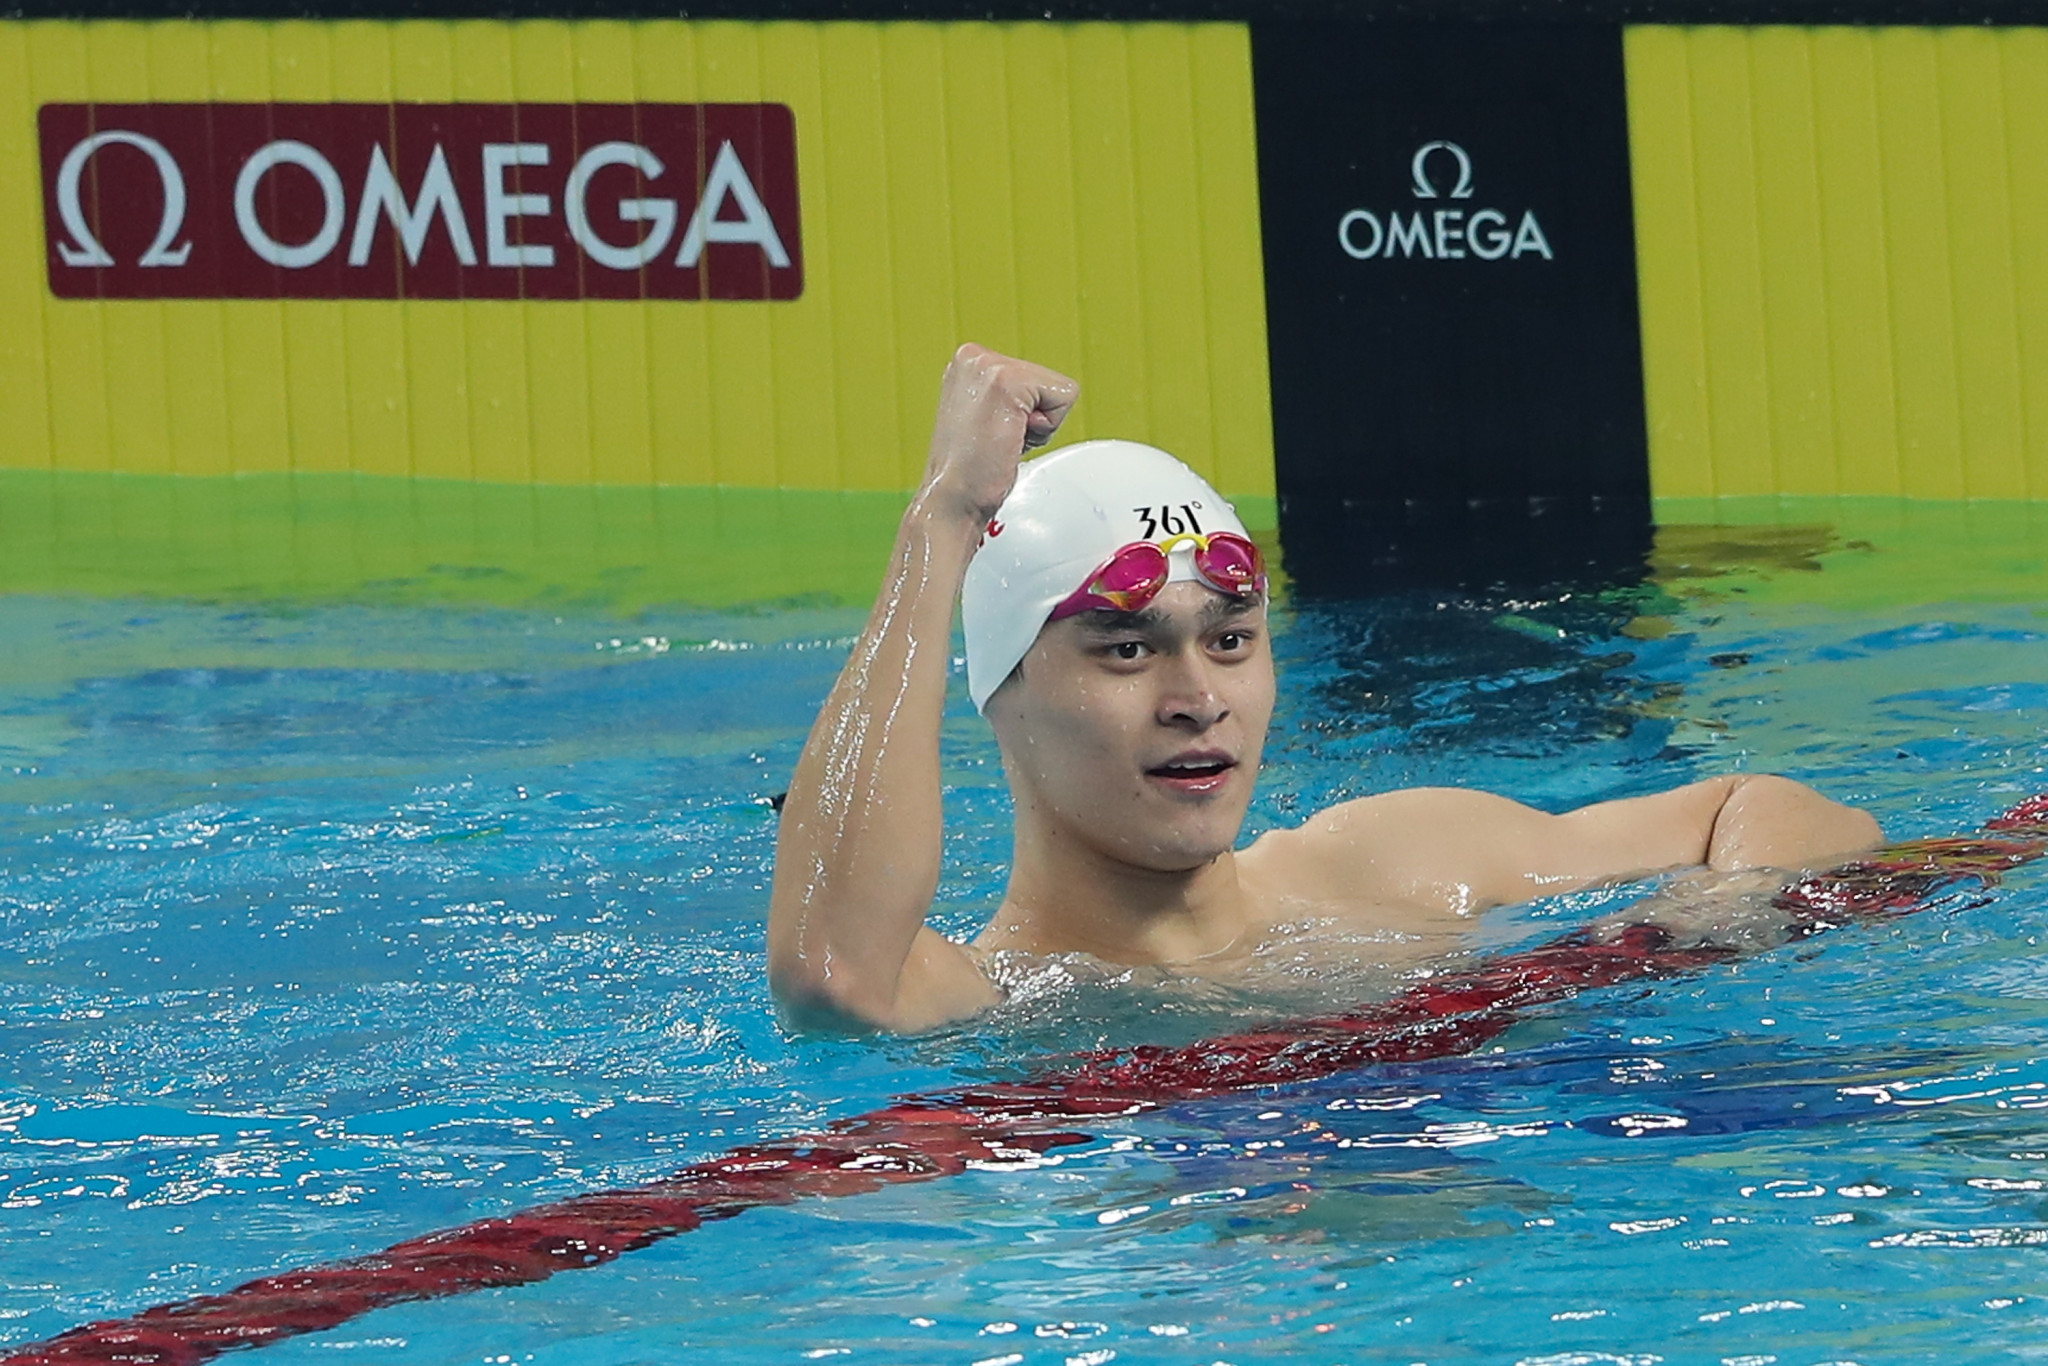 Swiss Federal Tribunal overturns eight-year doping ban given to Sun Yang by CAS